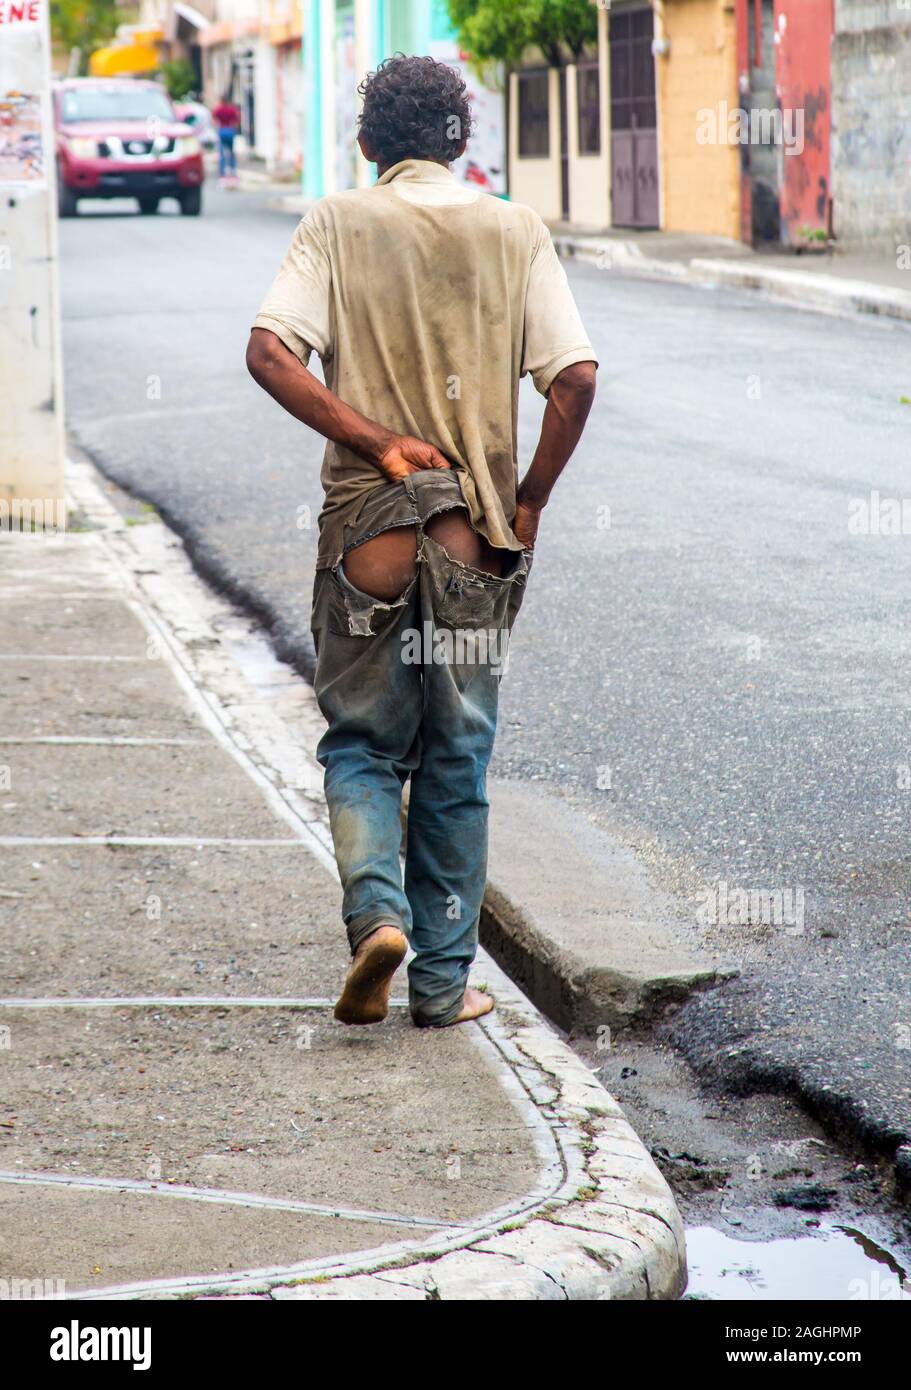 dramatic image of a poverty stricken dominican man walking down